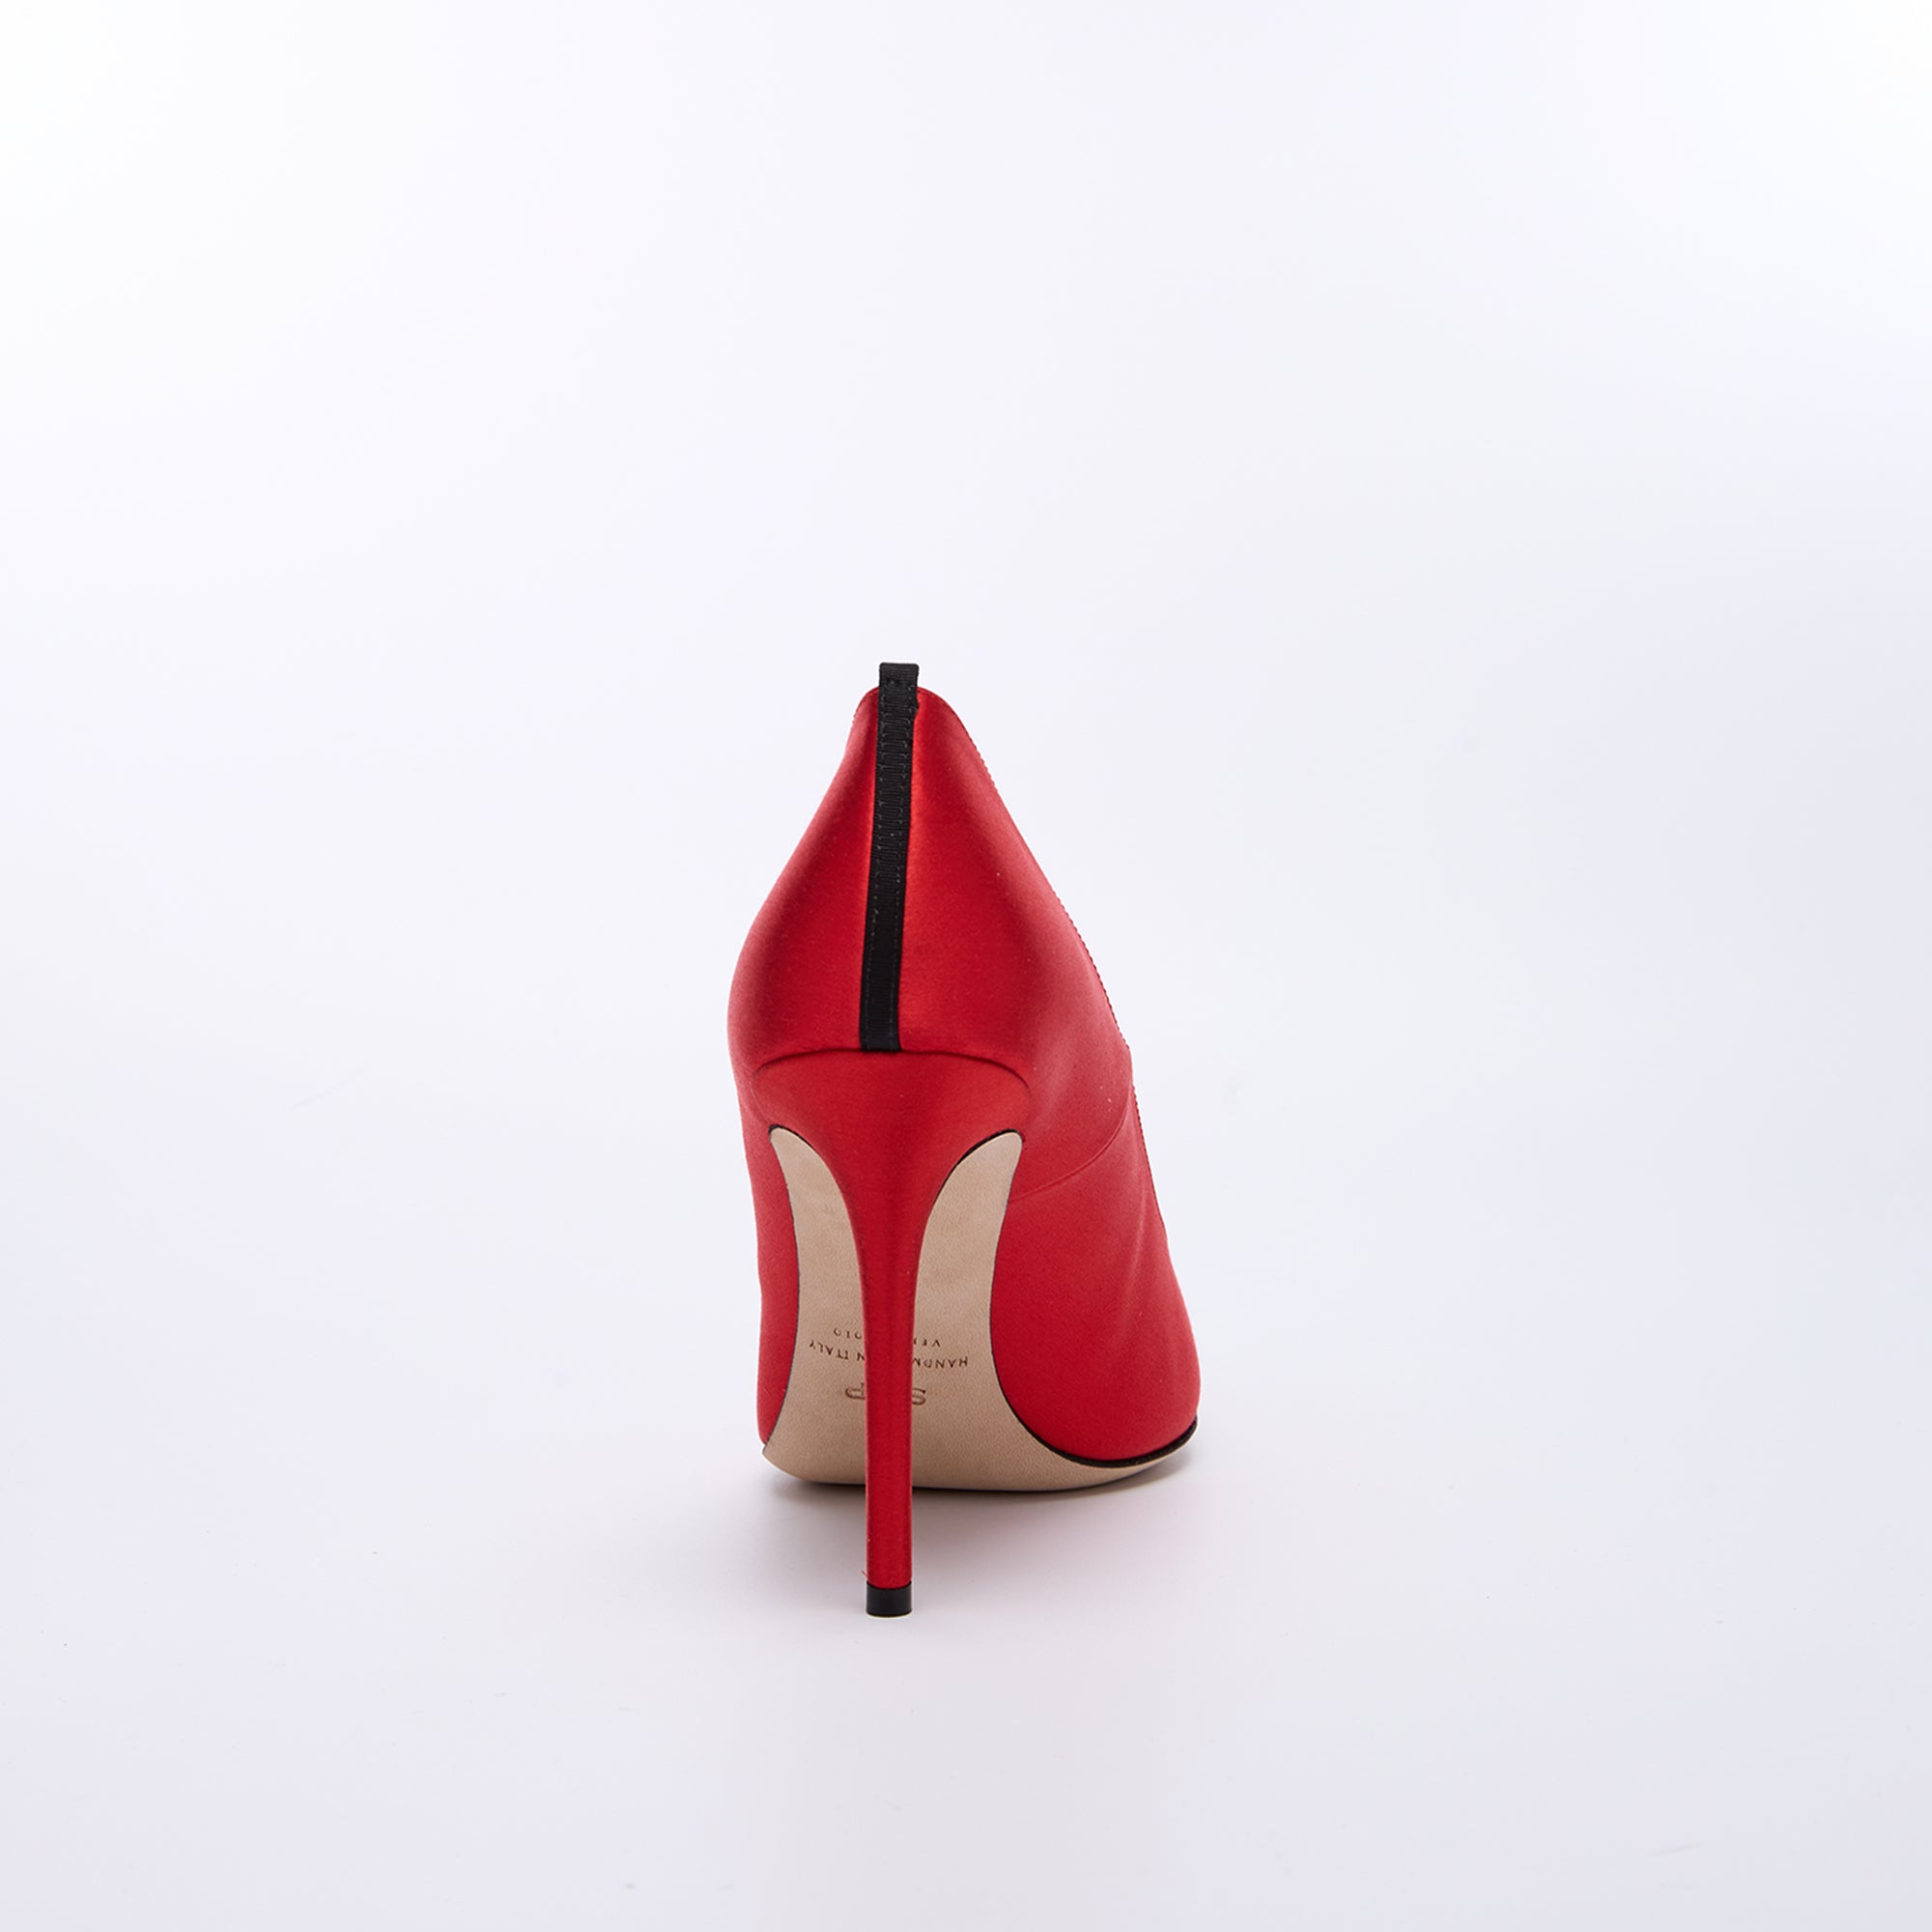 SJP by Sarah Jessica Parker Fawn 100mm Red Satin Pumps